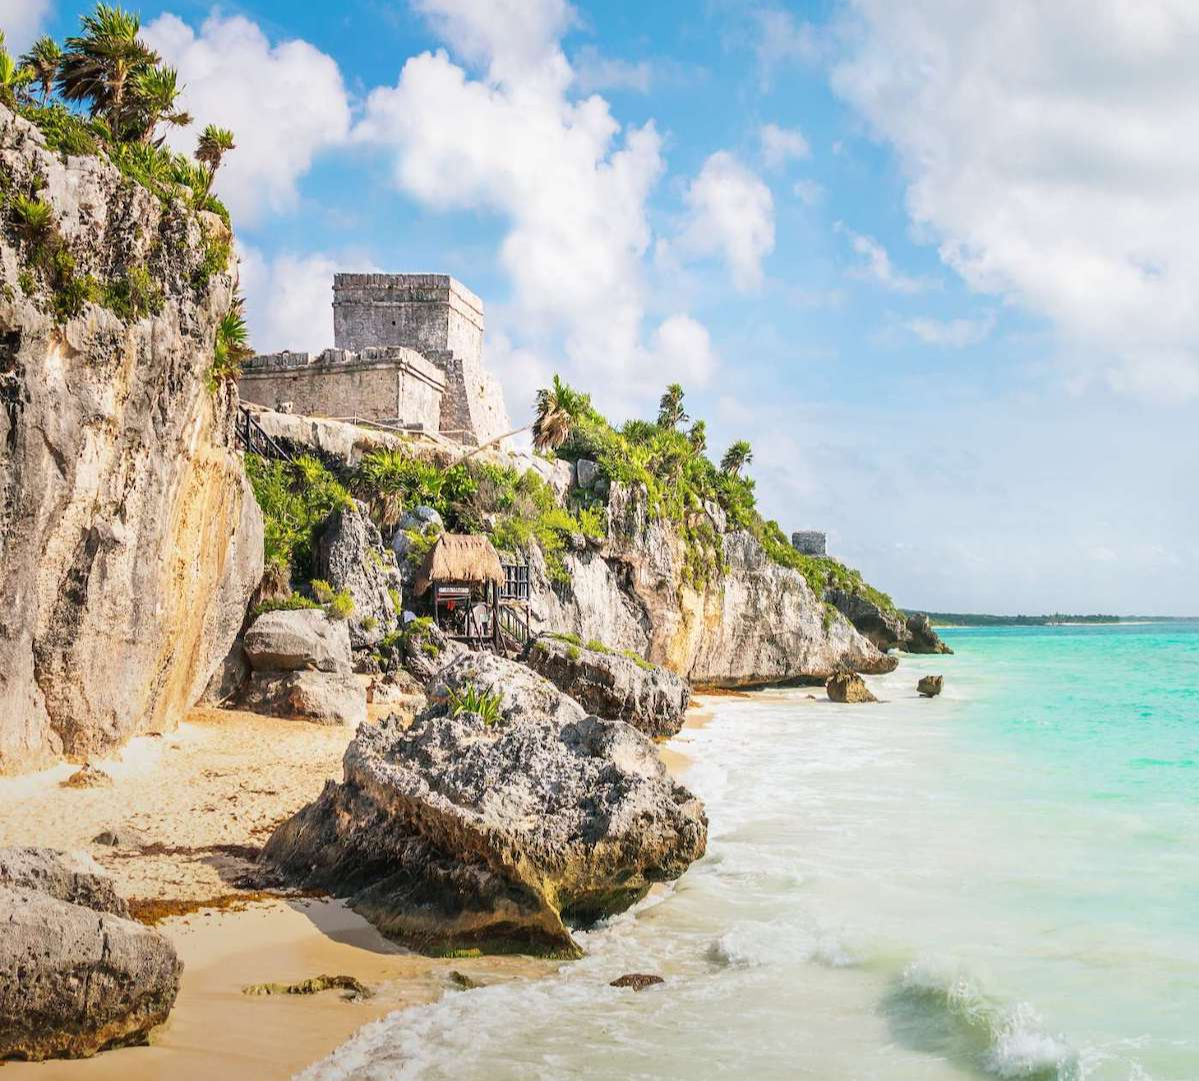 Tulum ruins sit high on a cliff overlooking a beach on a beautiful day. 